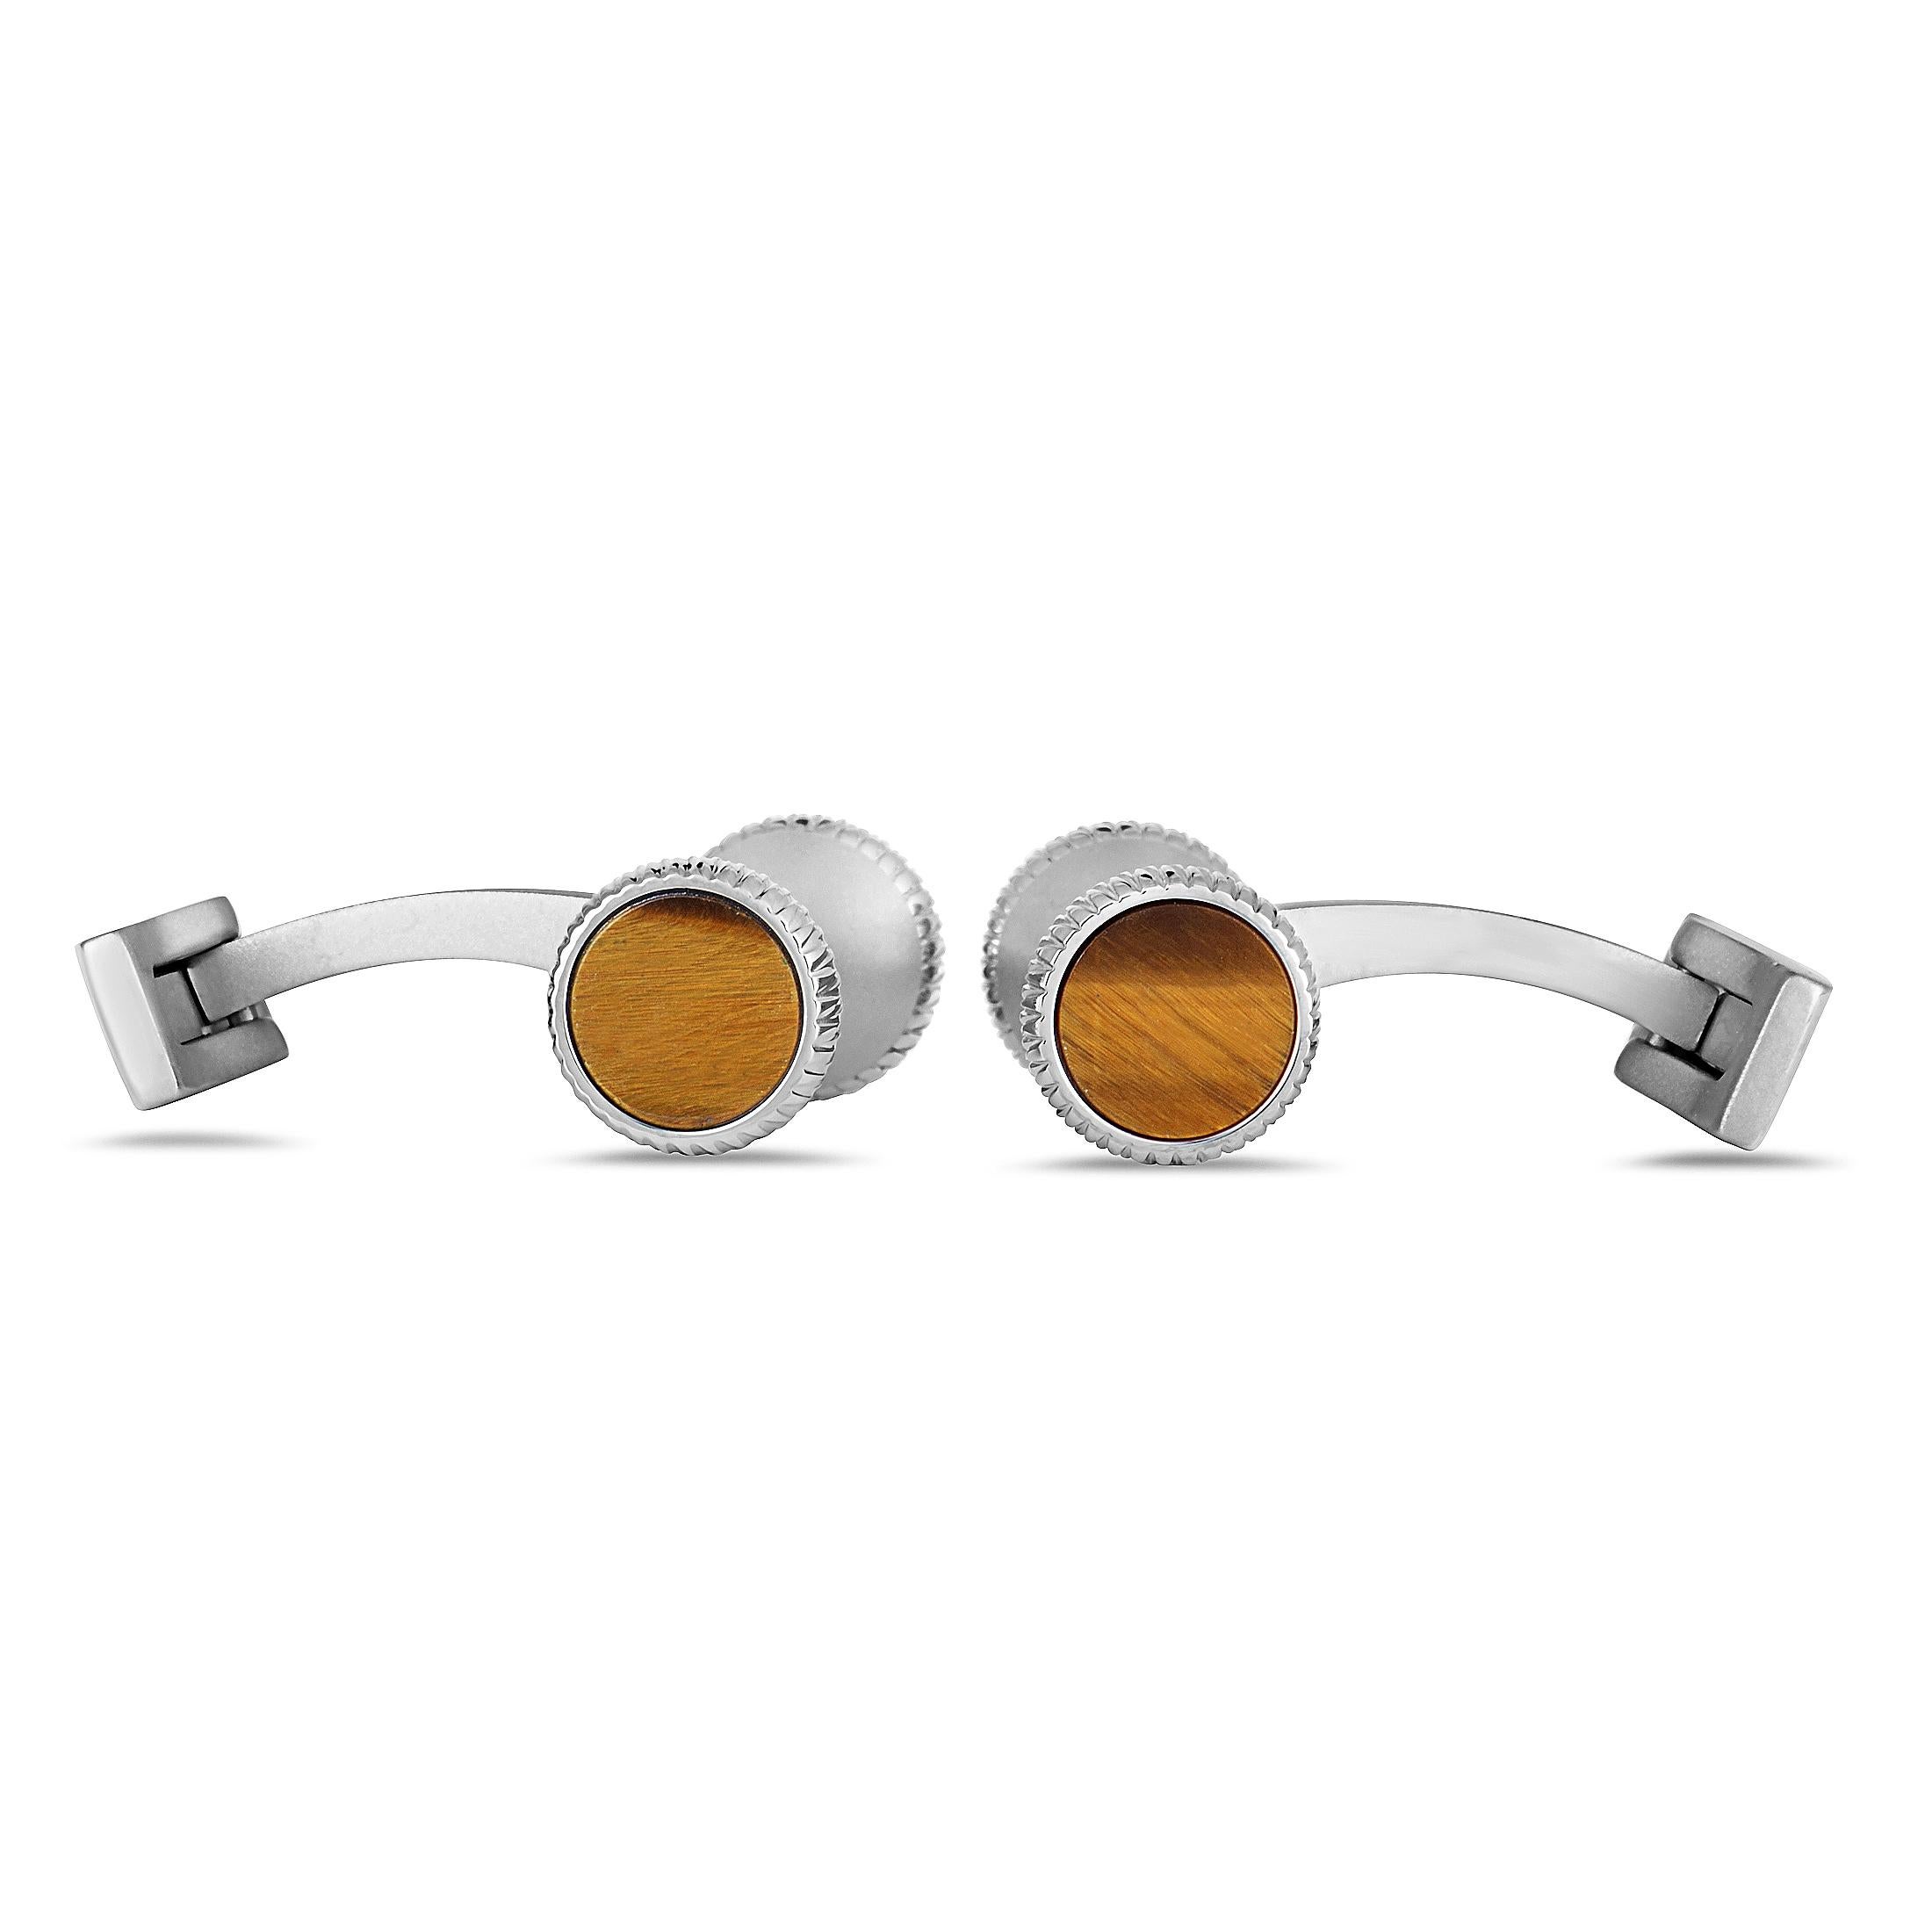 Applying an amazingly fine finish to an irresistibly smooth and slightly unconventional shape to produce marvelous play of light upon the splendidly bright surface of durable stainless steel, Charriol created this fantastic pair of cufflinks that